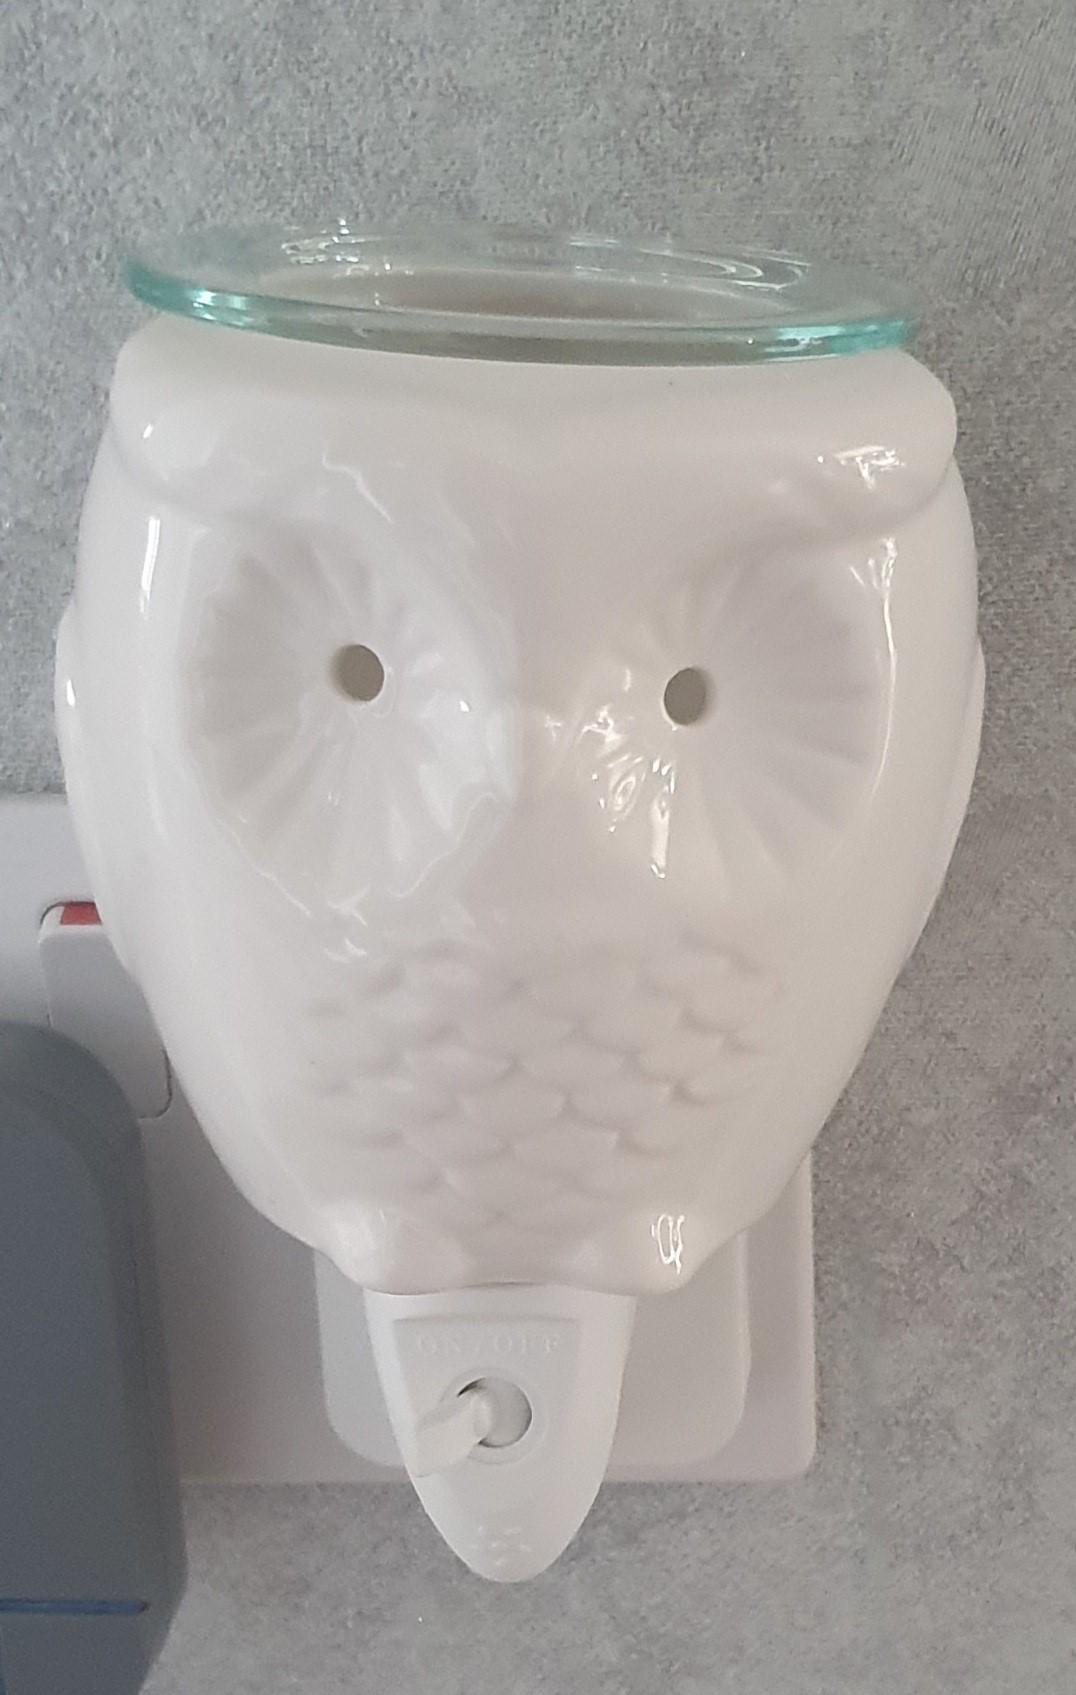 White ceramic owl with small circle cut outs for the eyes, glass tray on top, electric wall plugin.